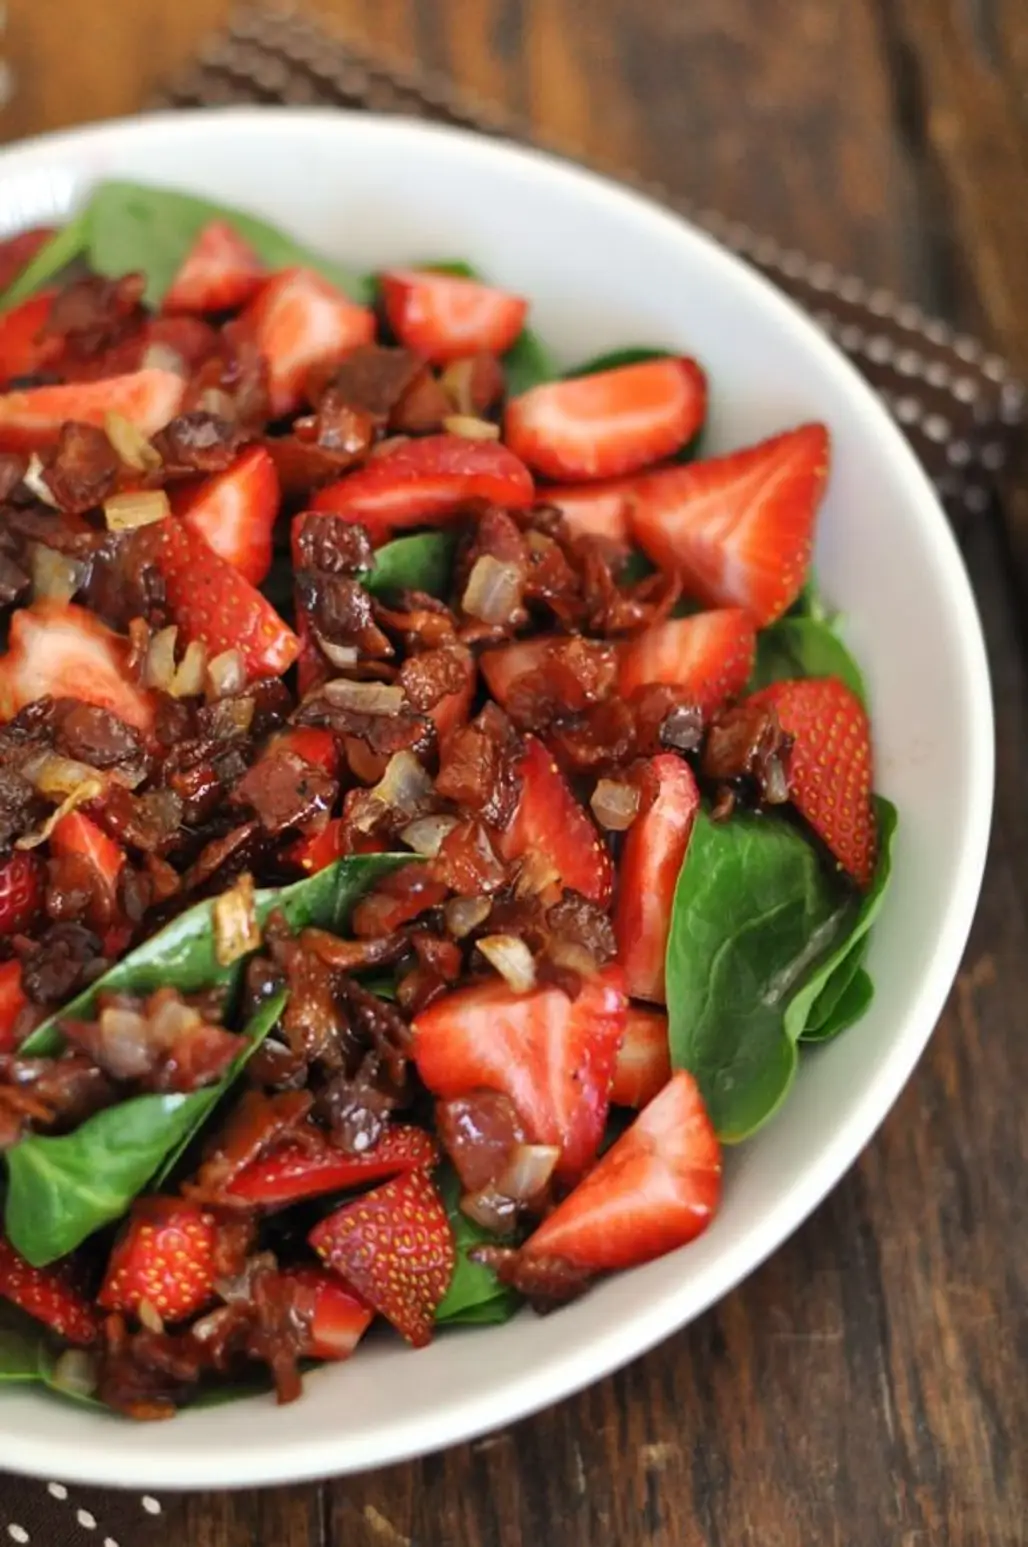 STRAWBERRY SPINACH SALAD with WARM BACON DRESSING